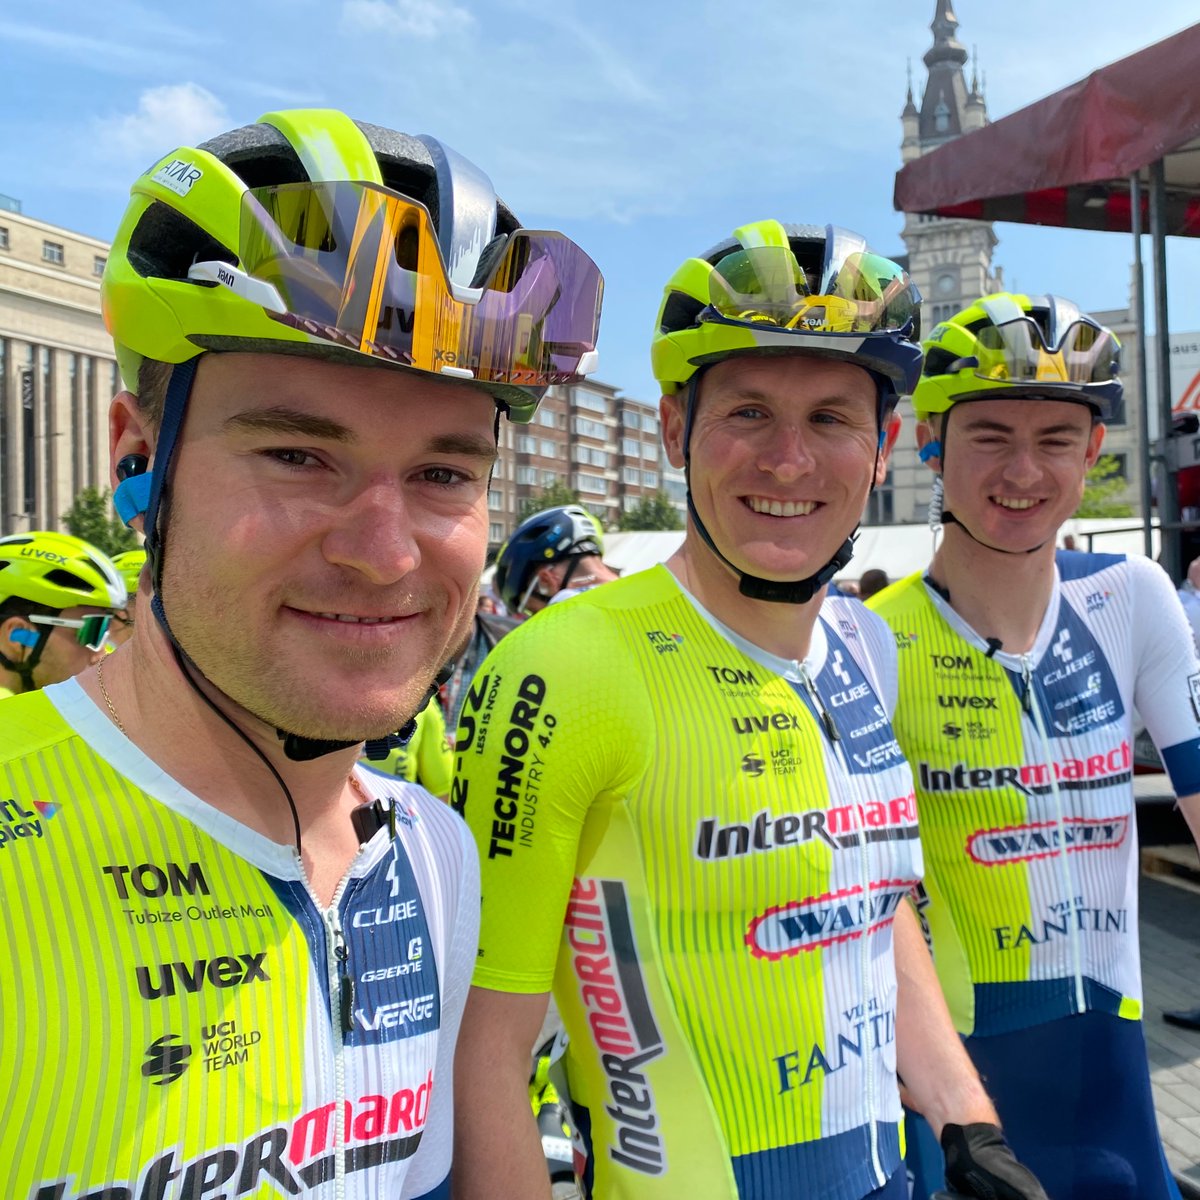 Our 3 cyclocross specialists racing with the World Team 😁 #CircuitDeWallonie 🇧🇪 Thijs Aerts 🇨🇭 Kevin Kuhn 🇧🇪 Gerben Kuypers